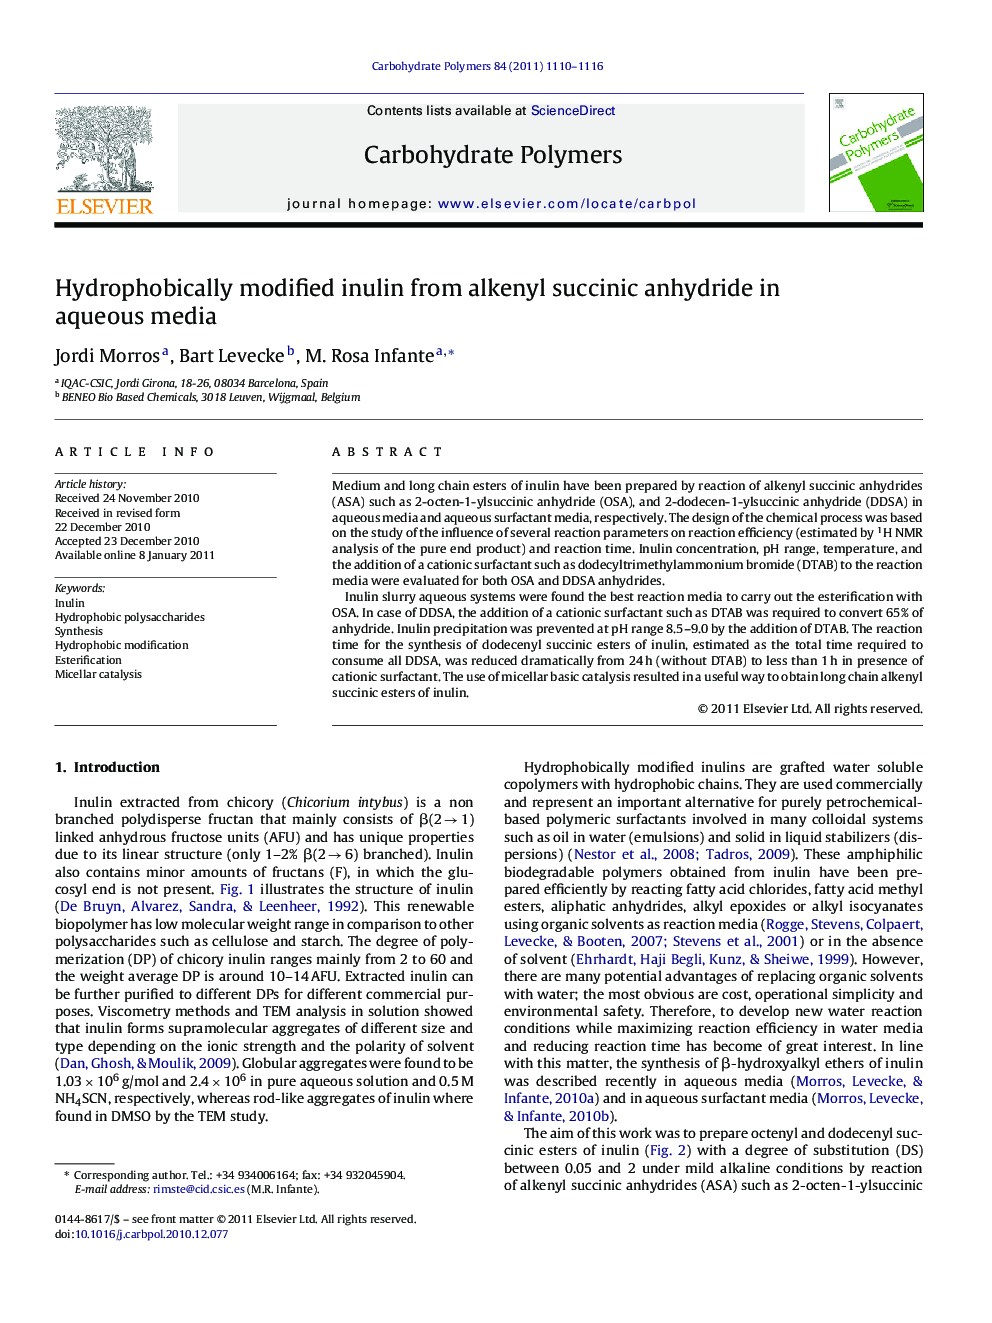 Hydrophobically modified inulin from alkenyl succinic anhydride in aqueous media